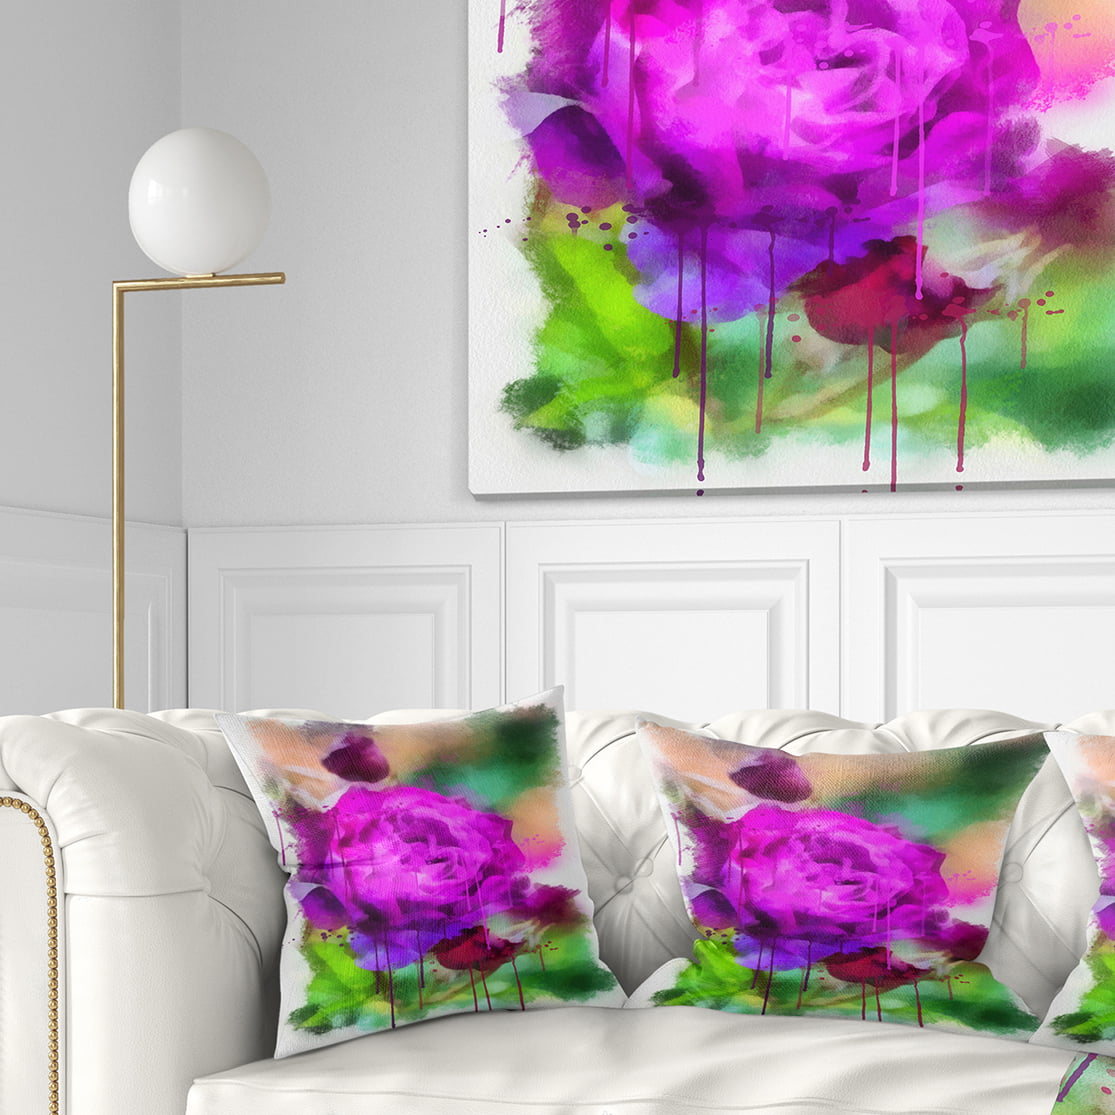 Sofa Throw Pillow 16 x 16 Designart CU13690-16-16 Purple Watercolor Rose Painting Floral Cushion Cover for Living Room